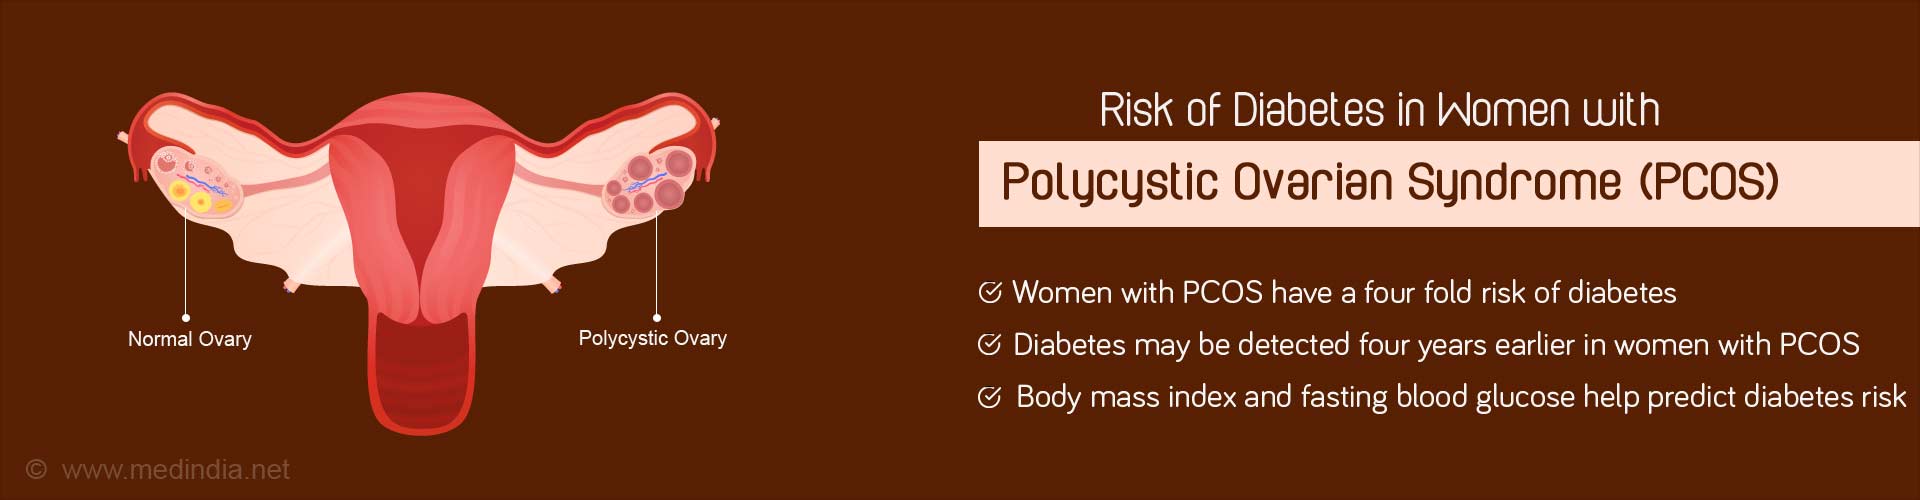 Risk of diabetes in women with polycystic ovarian syndrome (PCOS)
- women with PCOS have a four fold risk of diabetes
- diabetes may be detected four years earlier in women with PCOS
- body mass index and fasting blood glucose help predict diabetes risk